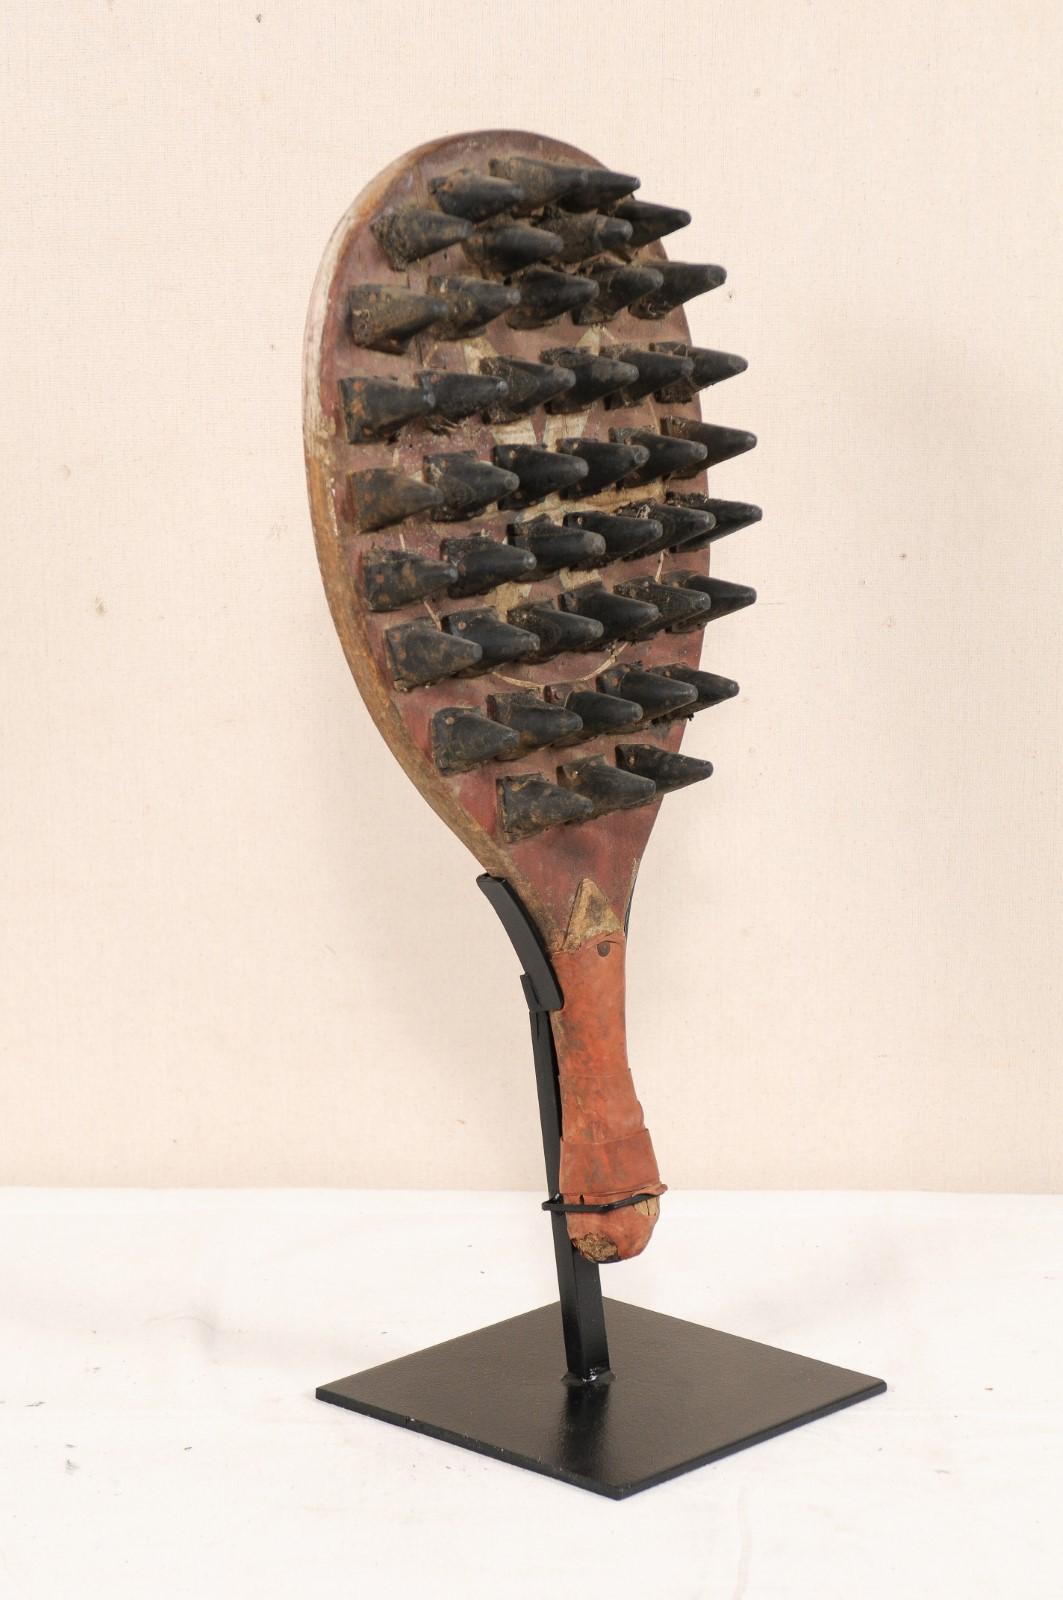 A wooden spiked gaming paddle from the mid-20th century. This vintage game paddle from India features a wooden handle and oval-shaped body with spikes projecting out at one side, with remnants of its original decorative paint showing throughout